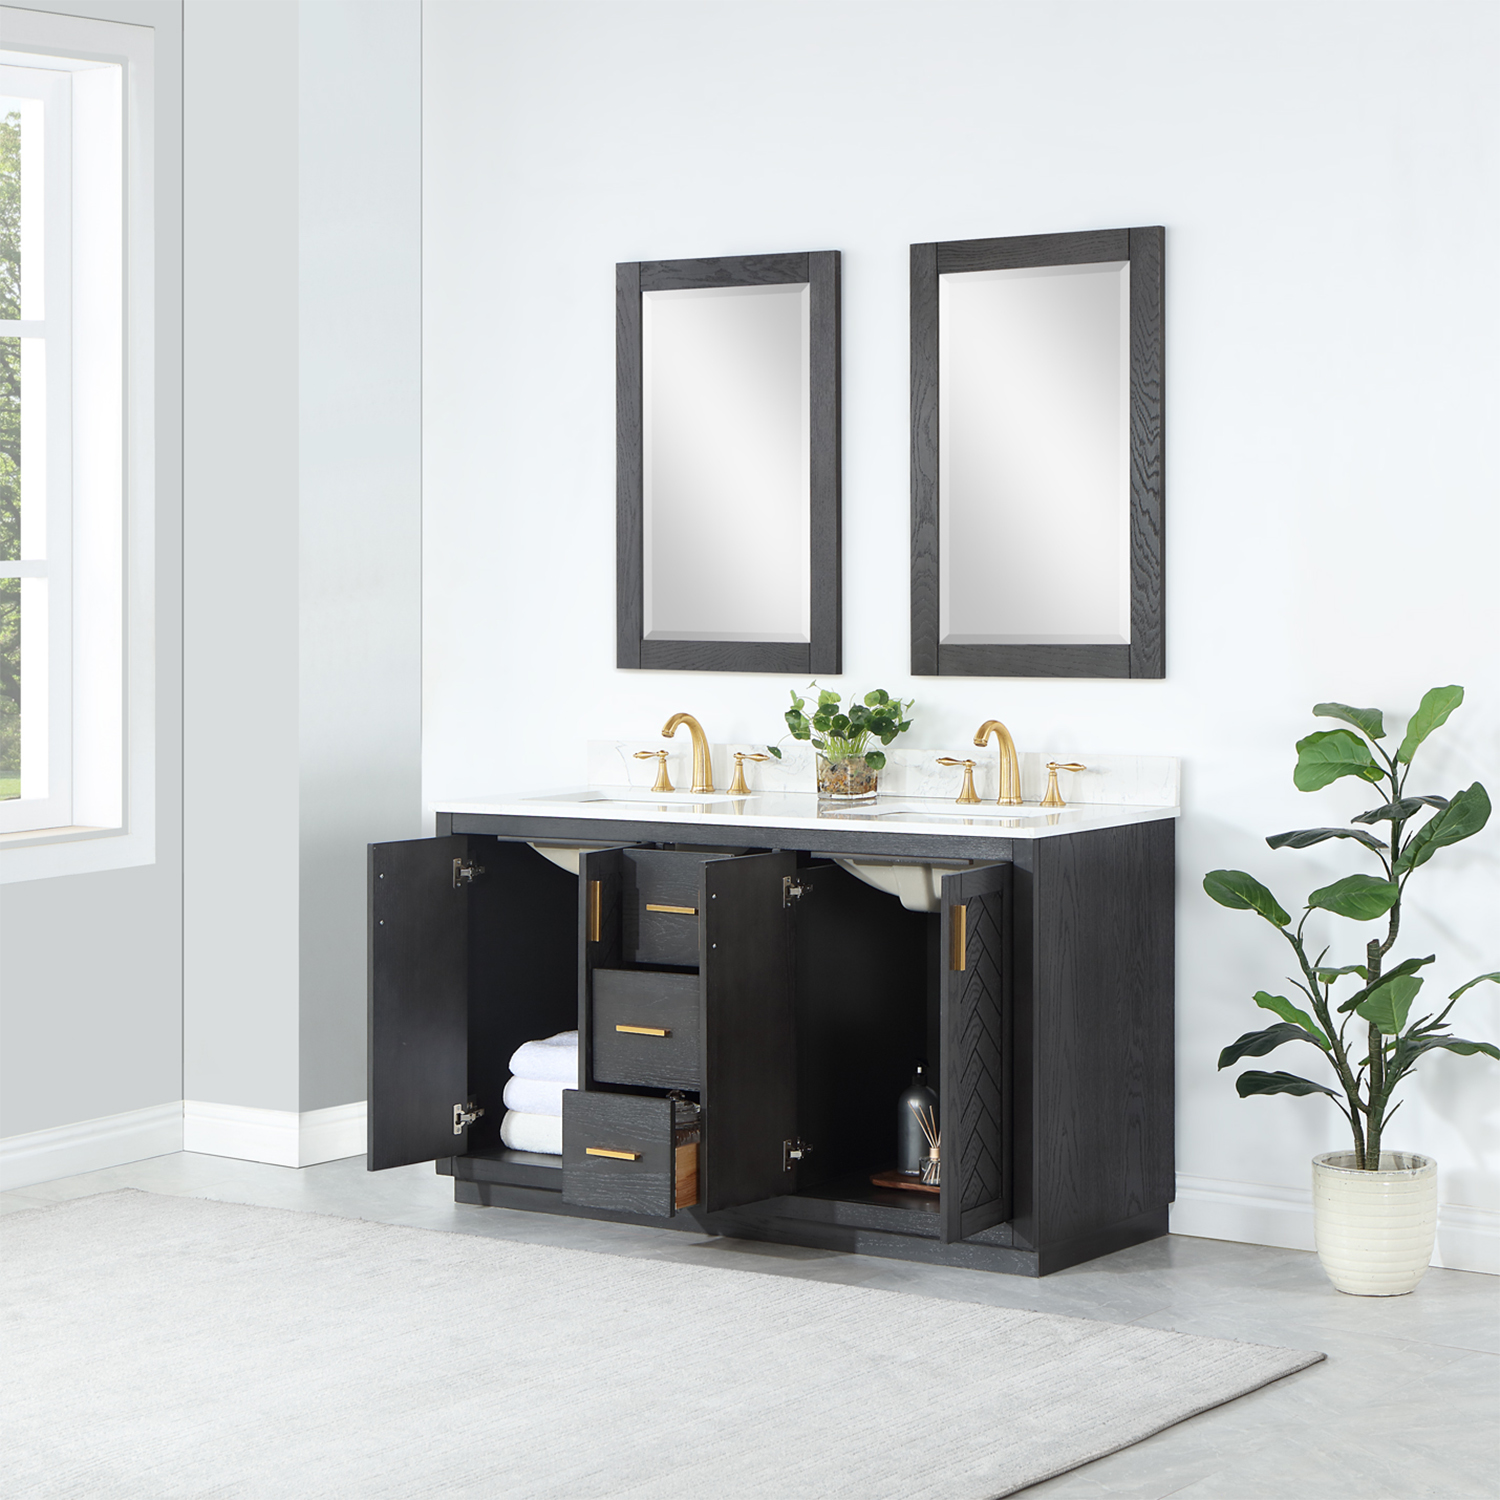  Issac Edwards Collection 60" Double Bathroom Vanity Set in Brown Oak with Grain White Composite Stone Countertop without Mirror